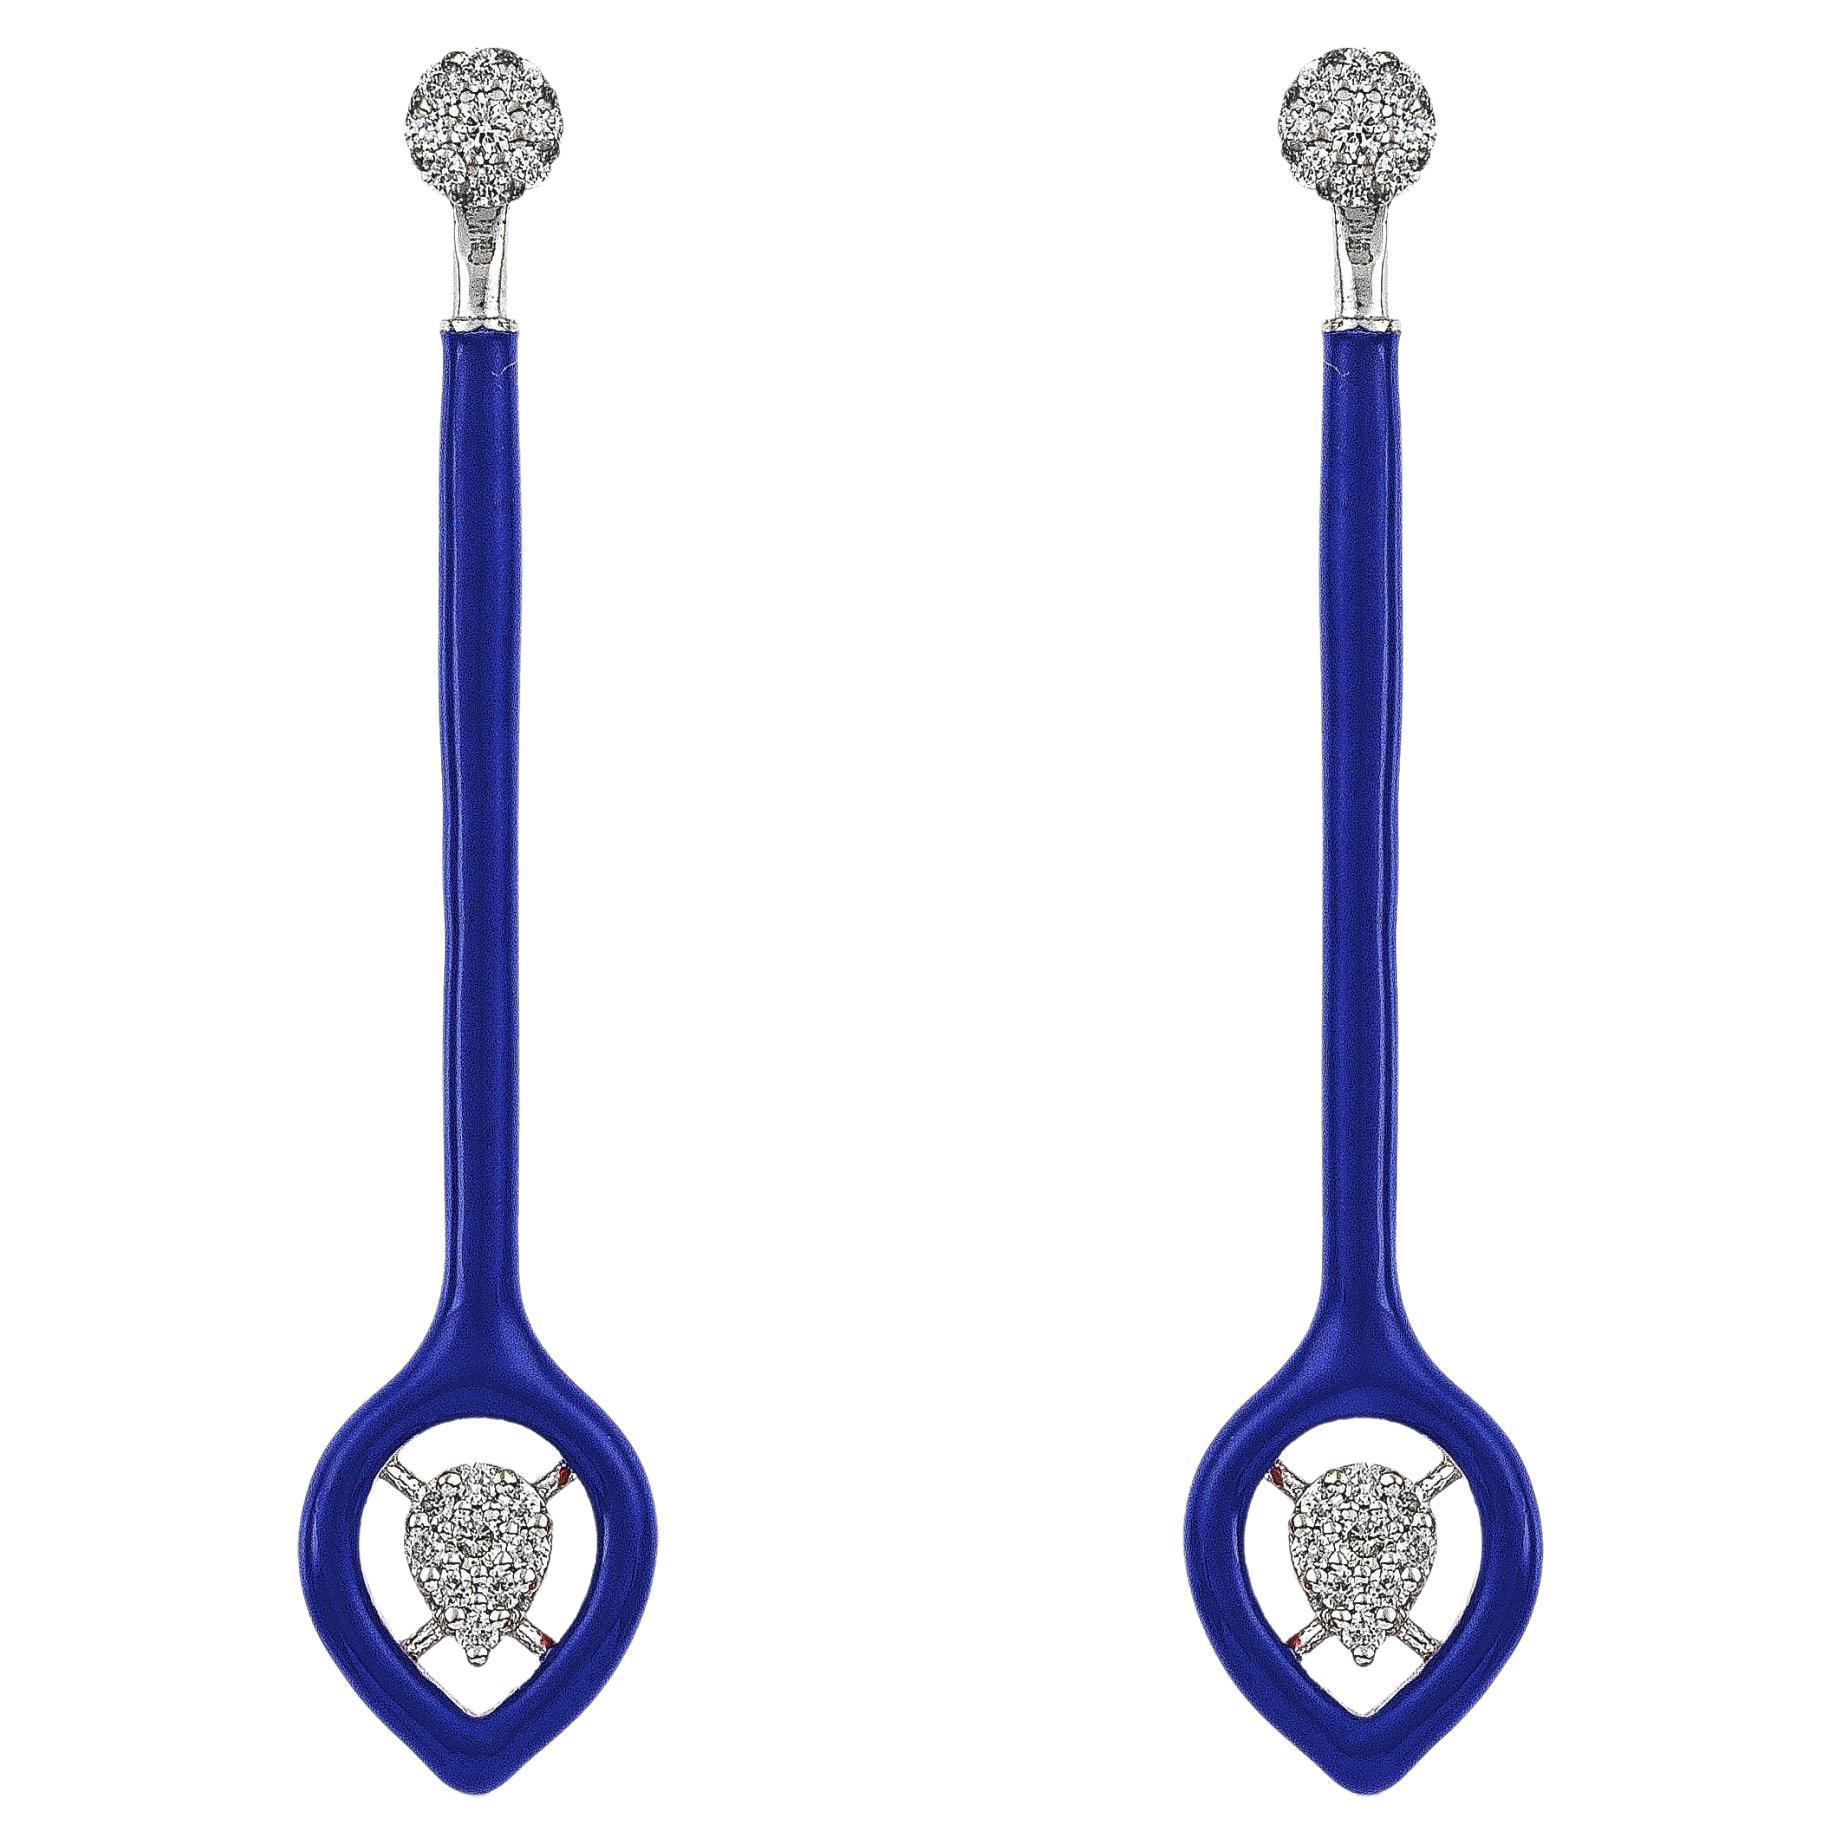 2-in-1 Bold Gold Earrings with Diamonds and Navy Enamel